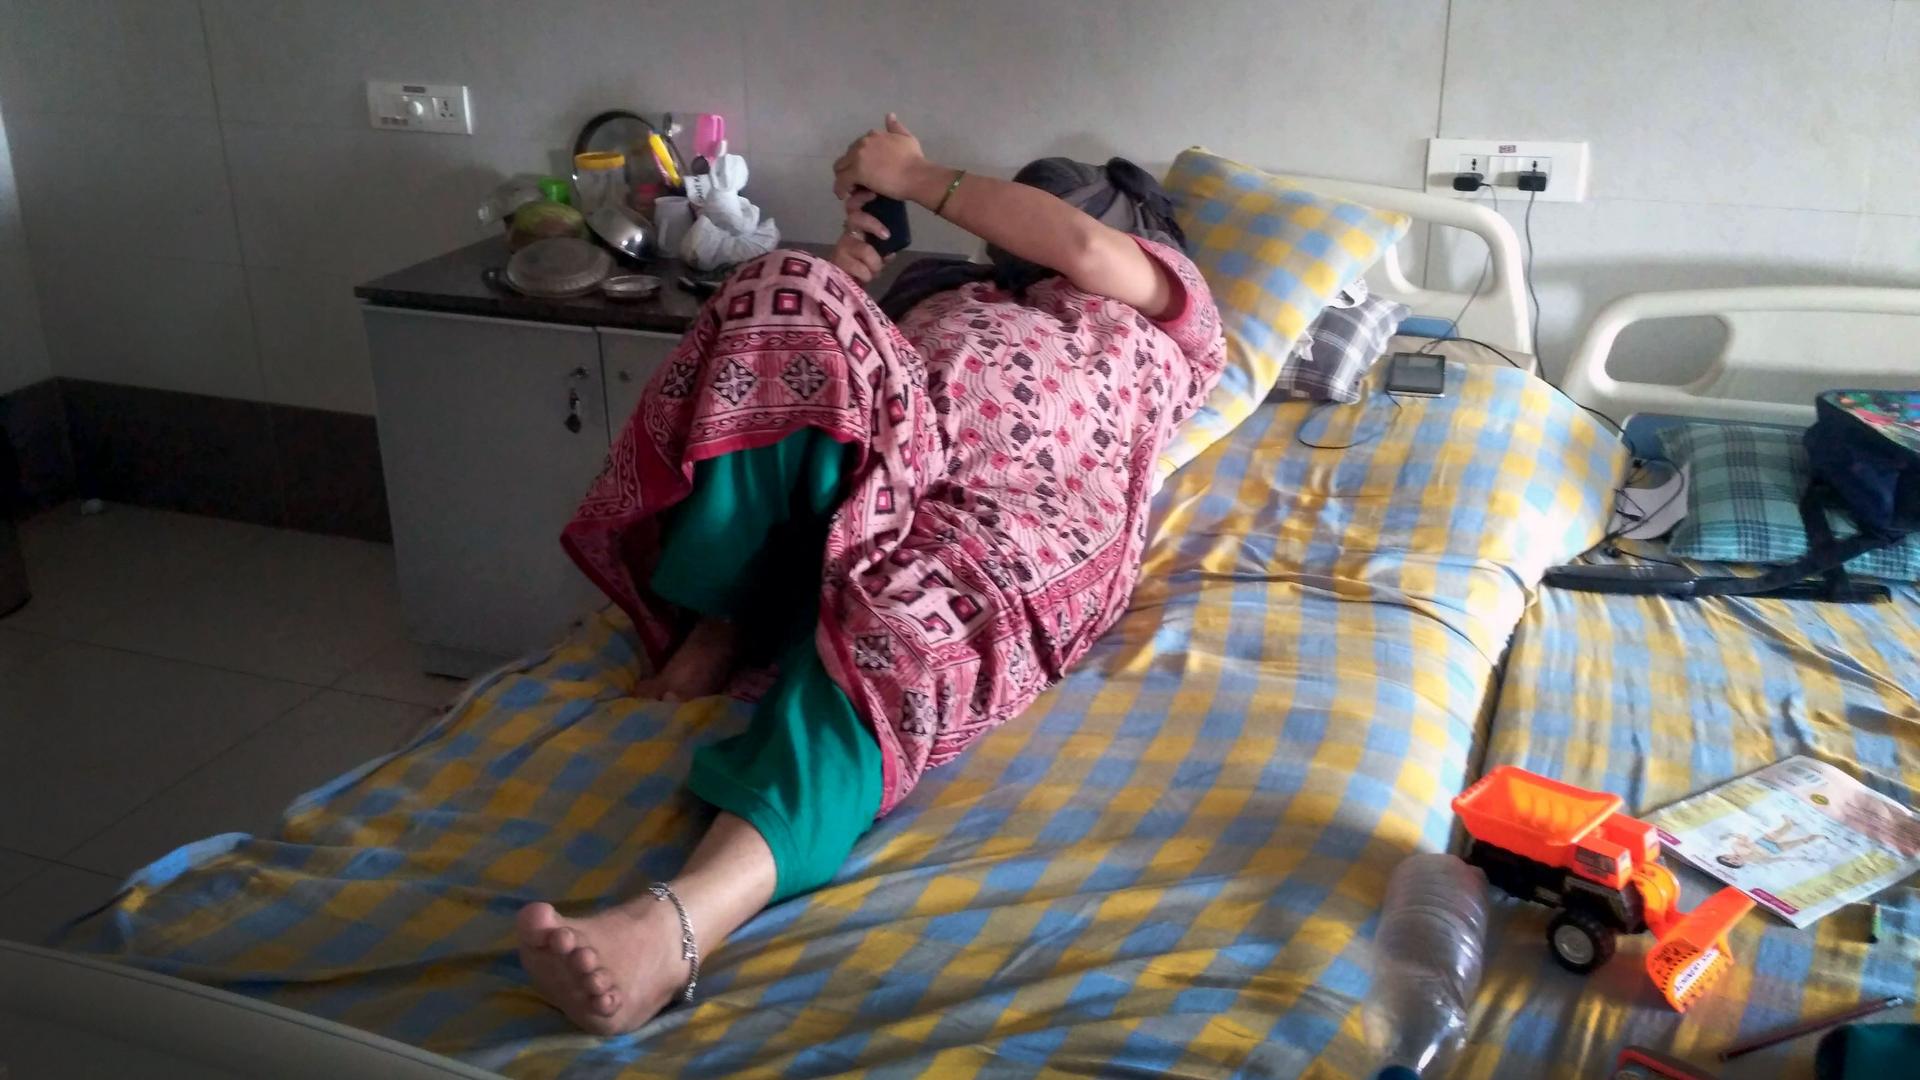 A woman lays on a hospital bed and turns her face away from the camera, reading the cell phone in her hand.